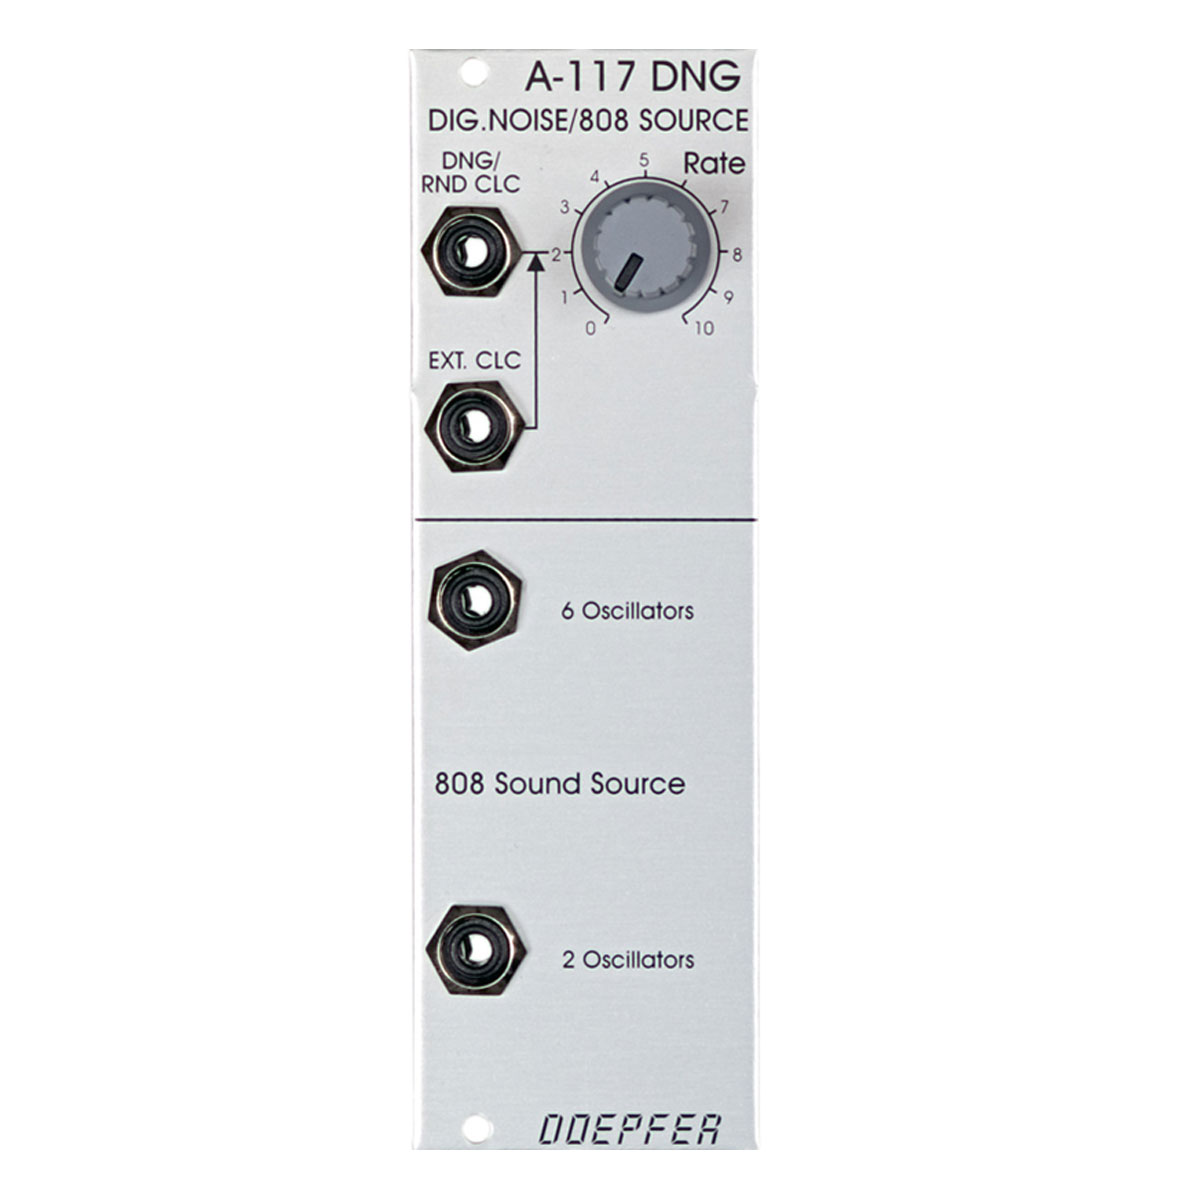 A-117 DNG. NOISE/808 SOURCE - A-100 Eurorack Modular Synthesizer